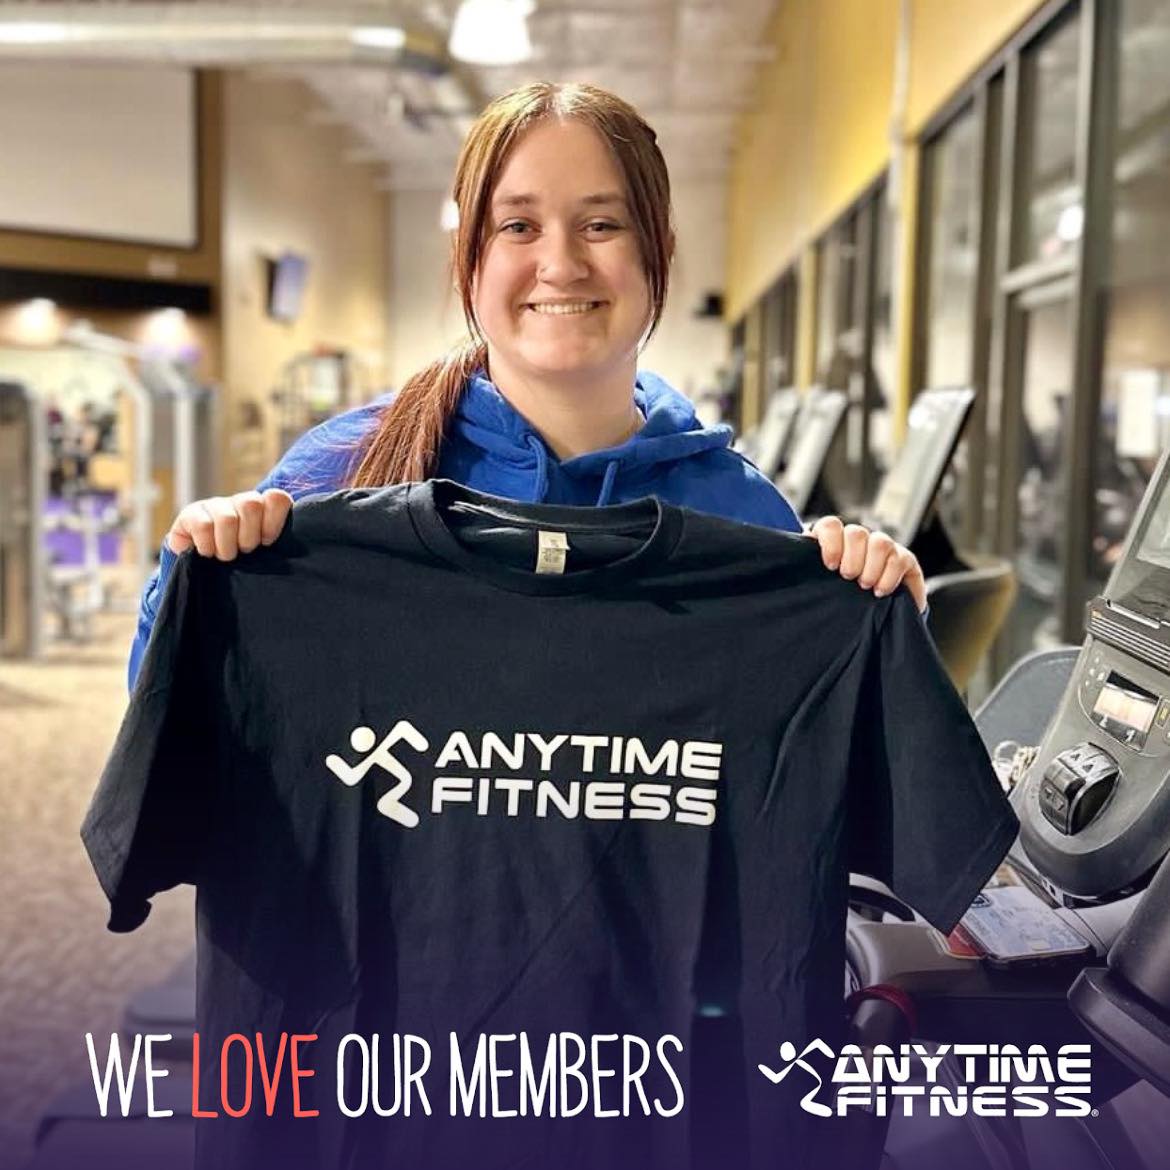 Anytime Fitness 1554 CA-99, Gridley California 95948